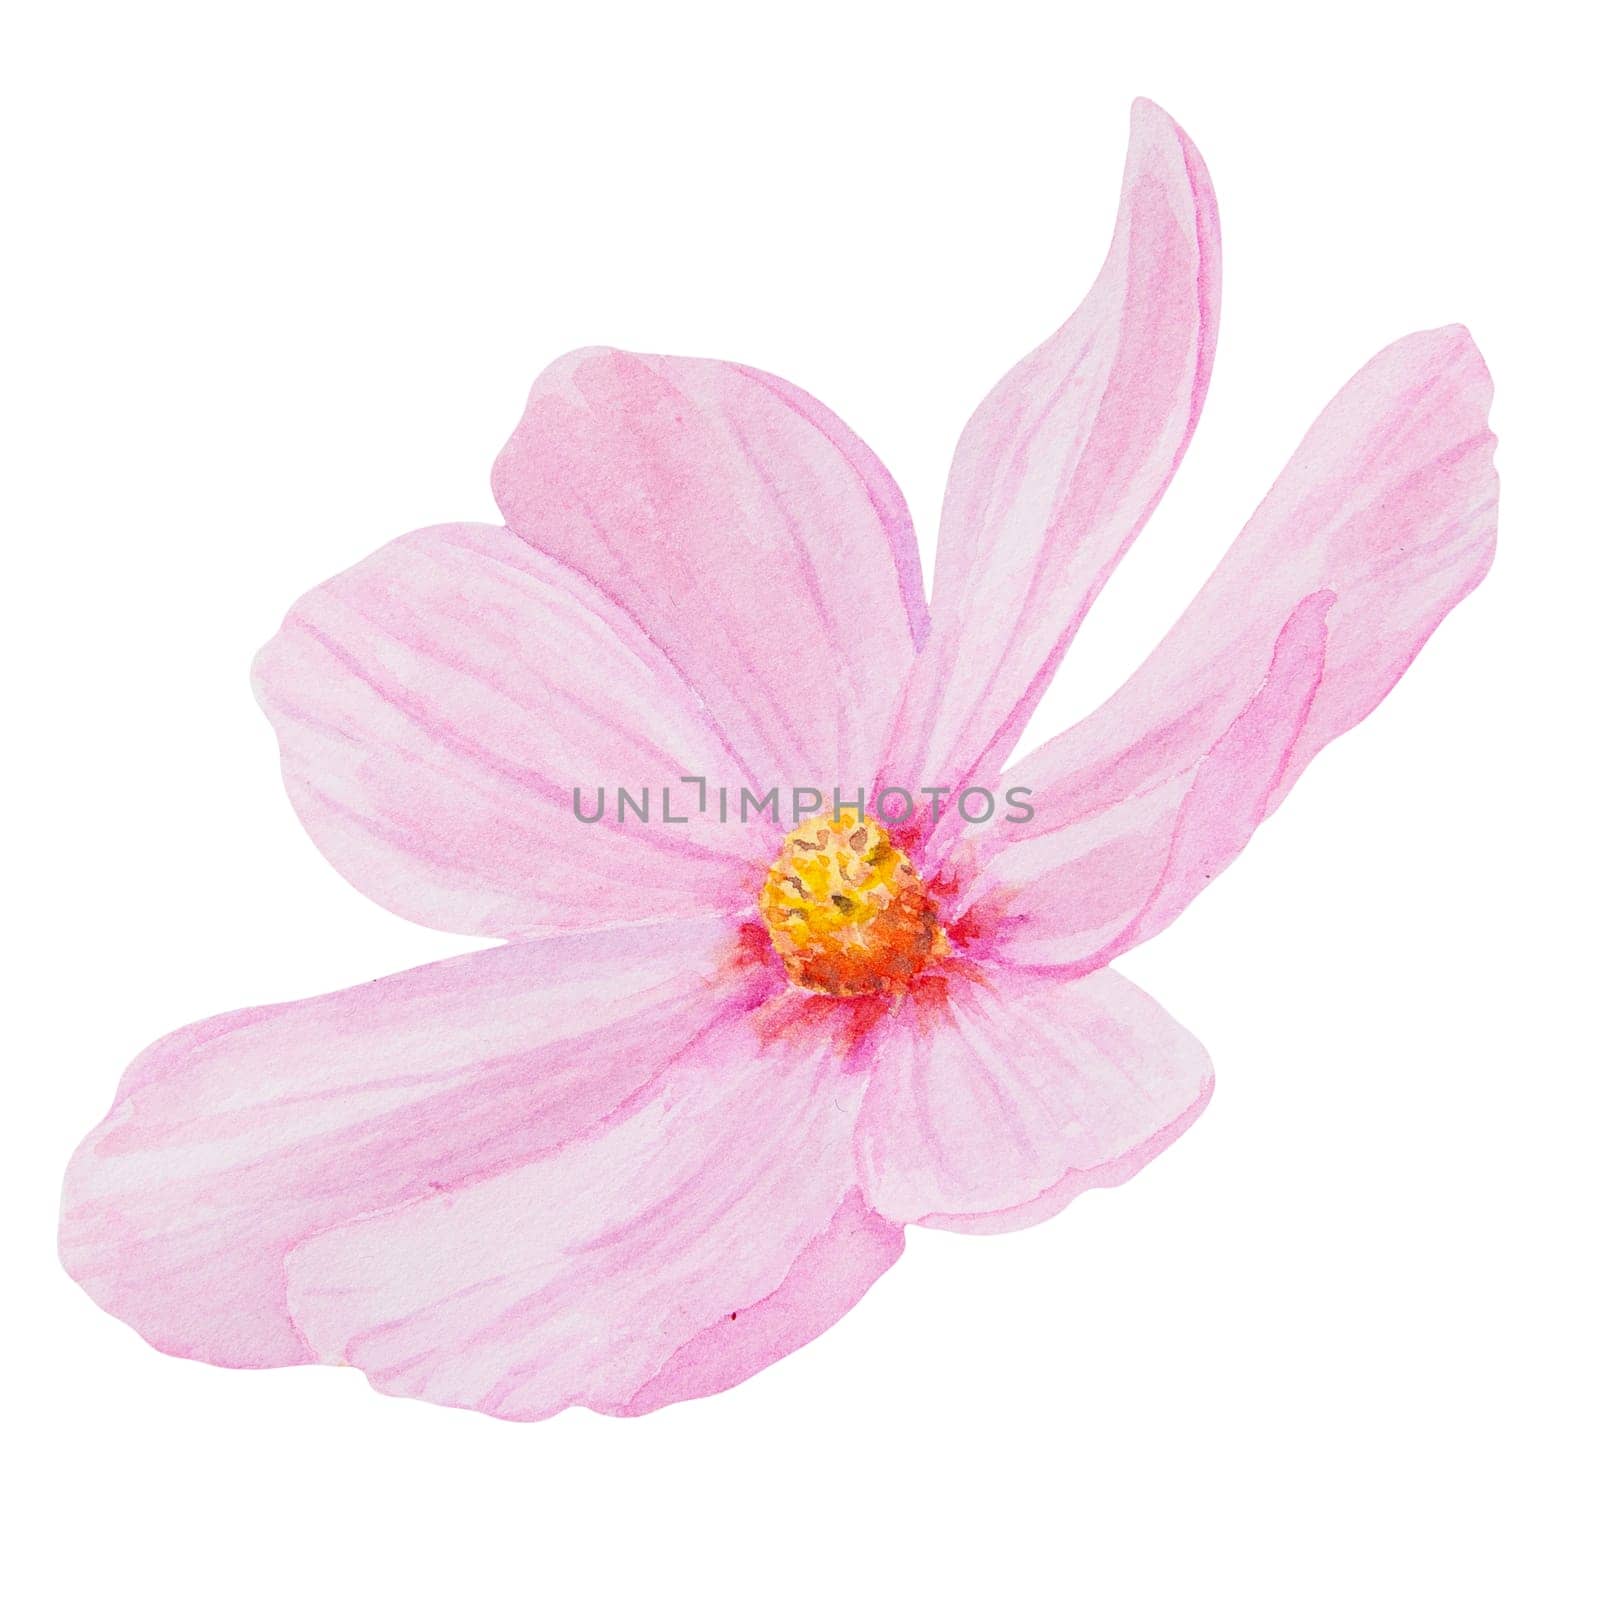 Garden pink Cosmos watercolor illustration. Hand drawn botanical painting, floral sketch. Colorful preety flower clipart for summer or autumn design of wedding invitation, prints, greetings, sublimation, textile